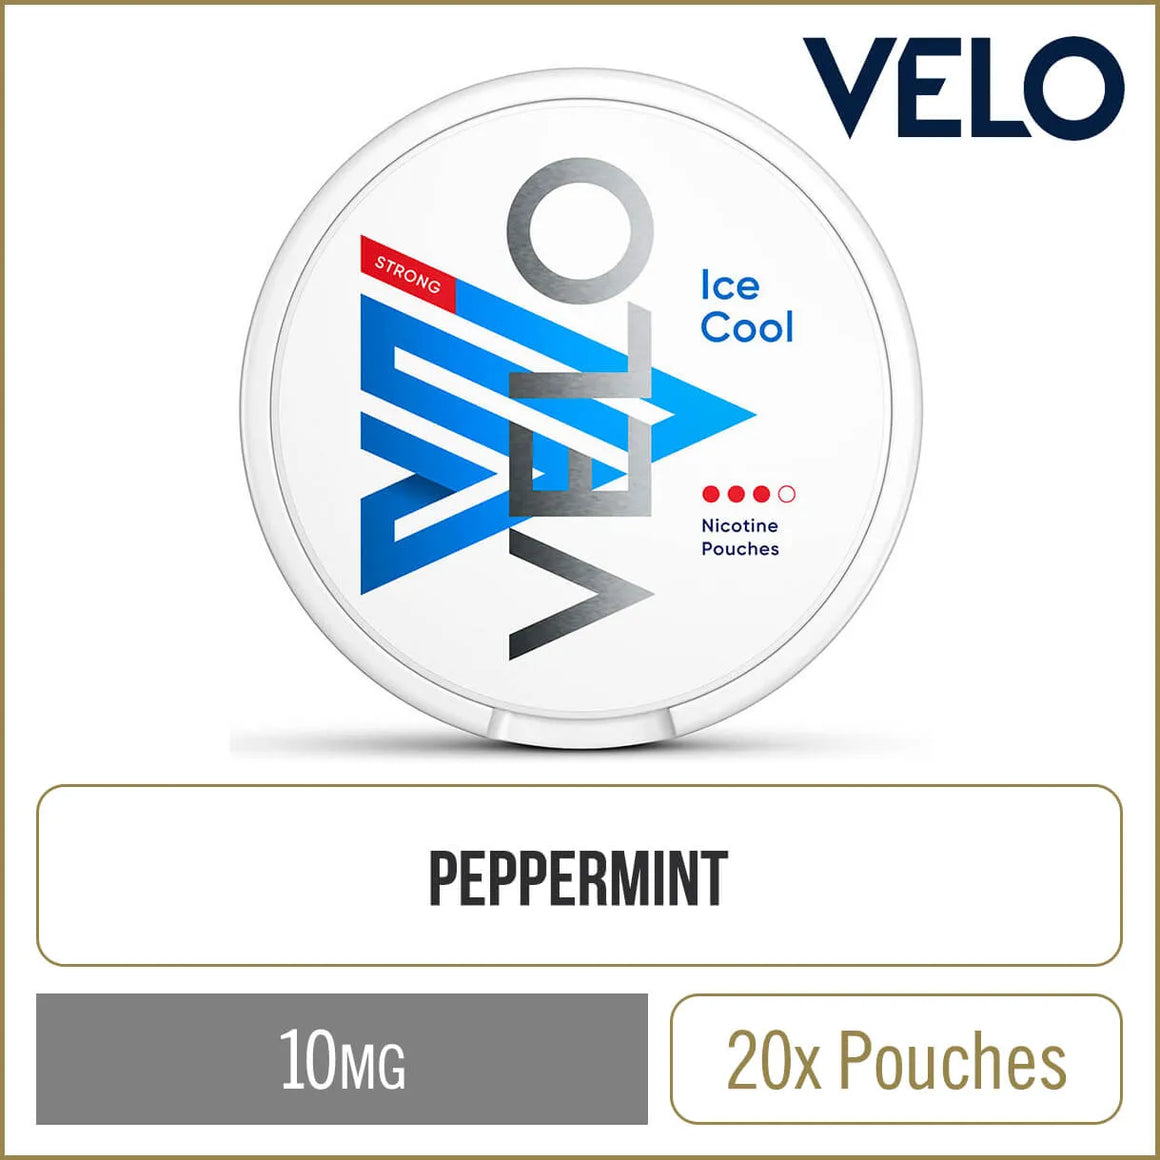 VELO Ice Cool Nicotine Pouches 20 Pack